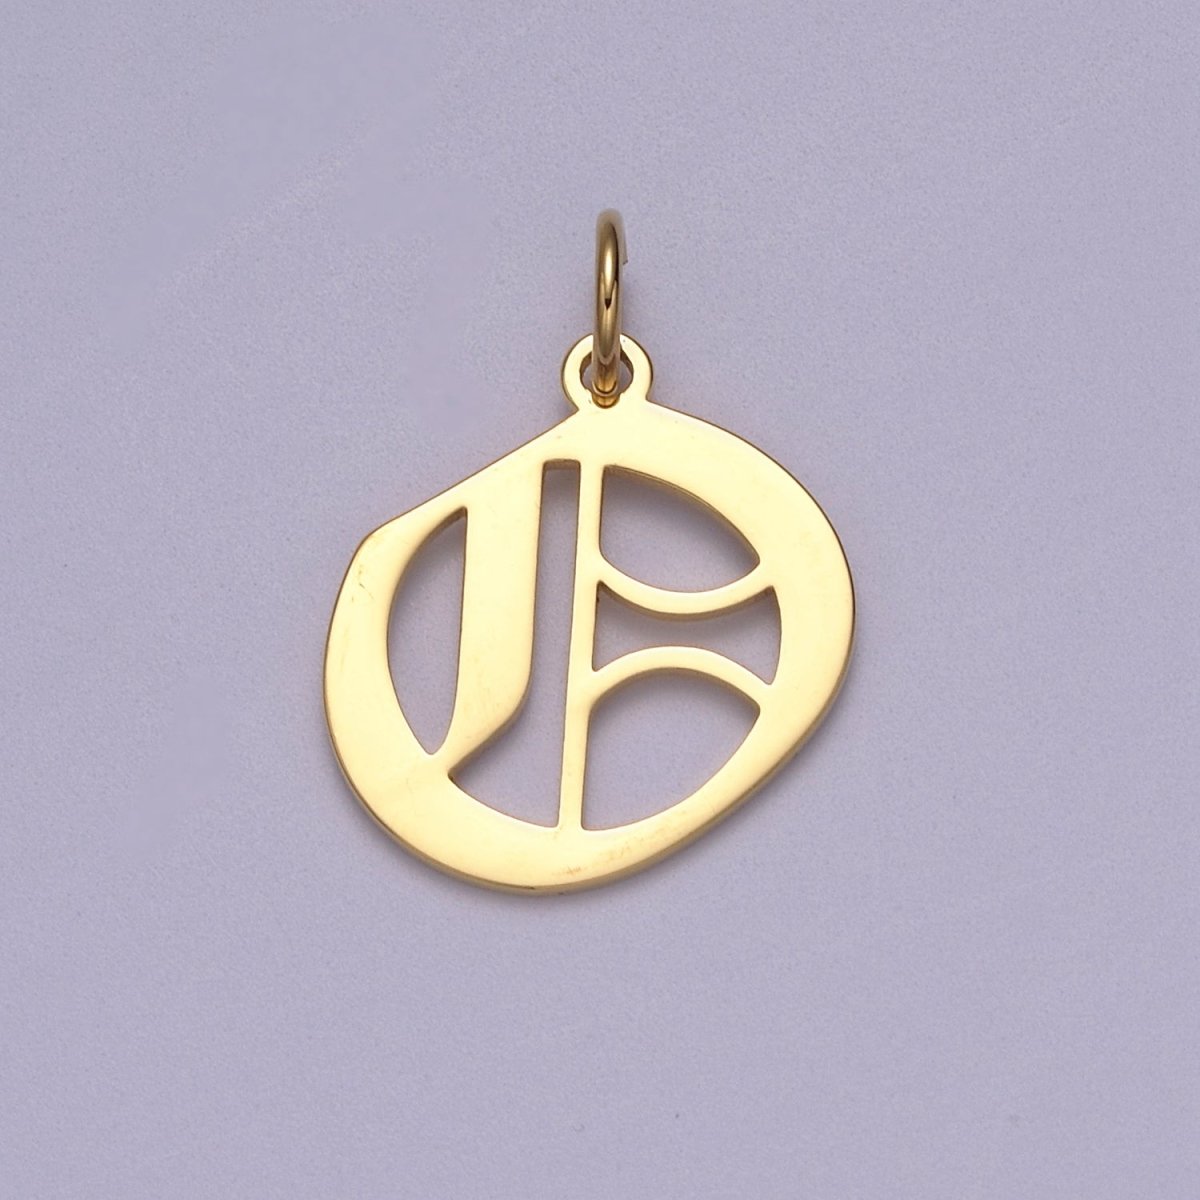 14k Gold Filled Old English Font Initial Letters Pendant Charm Wholesale Jewelry Supplies W-001 to W-027 - DLUXCA